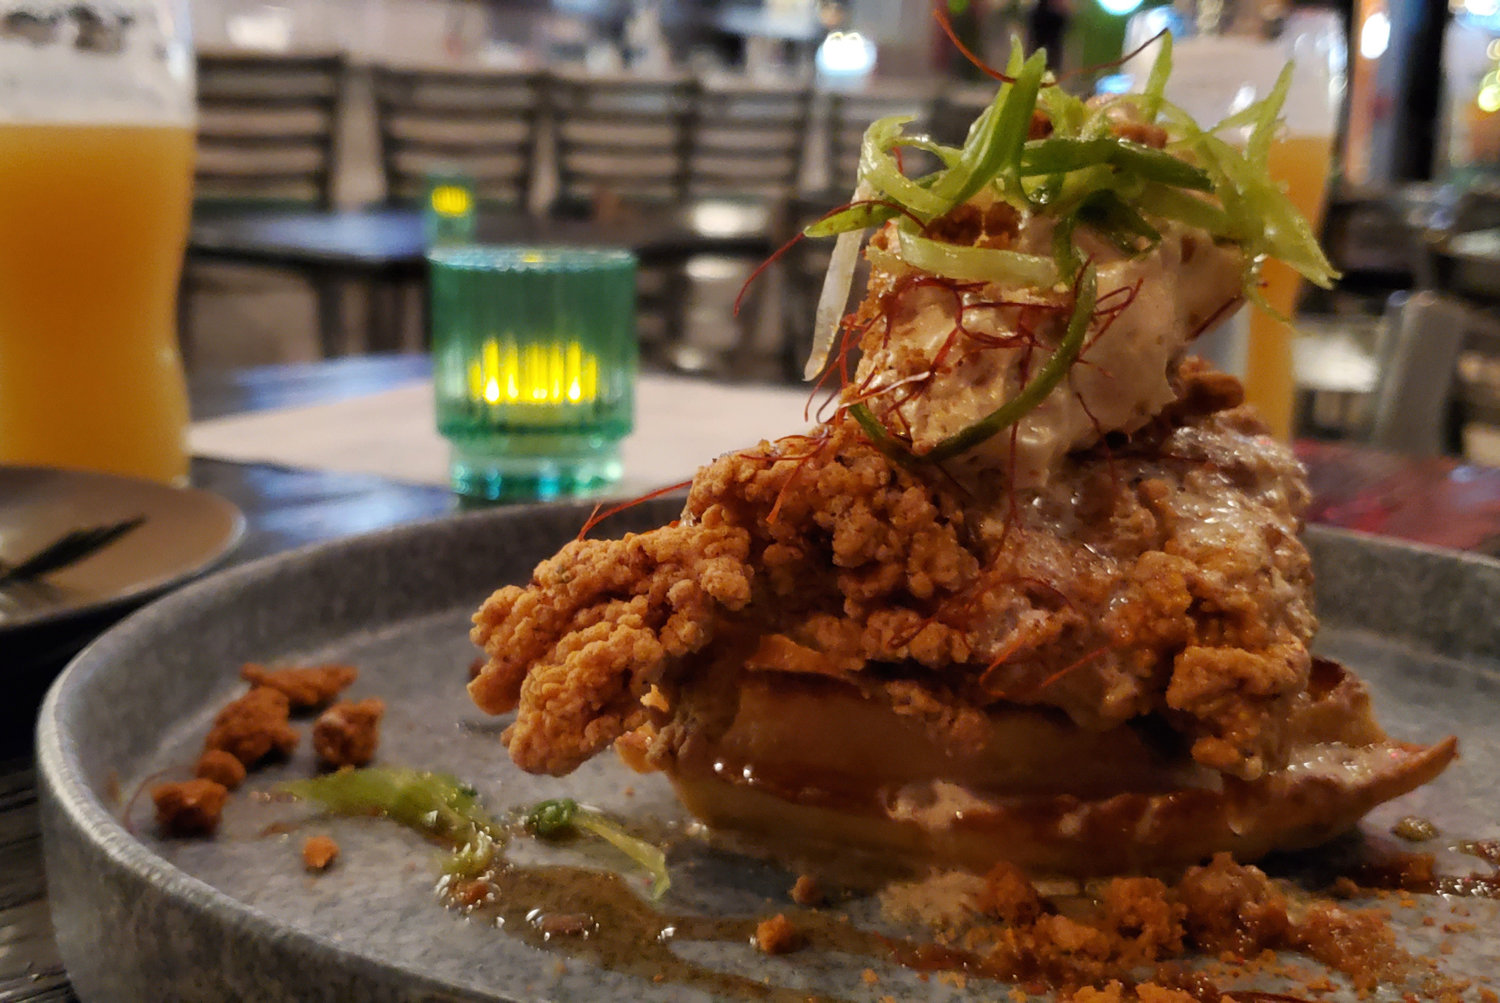 Chicken & Waffles topped with a dollop of brown sugar butter